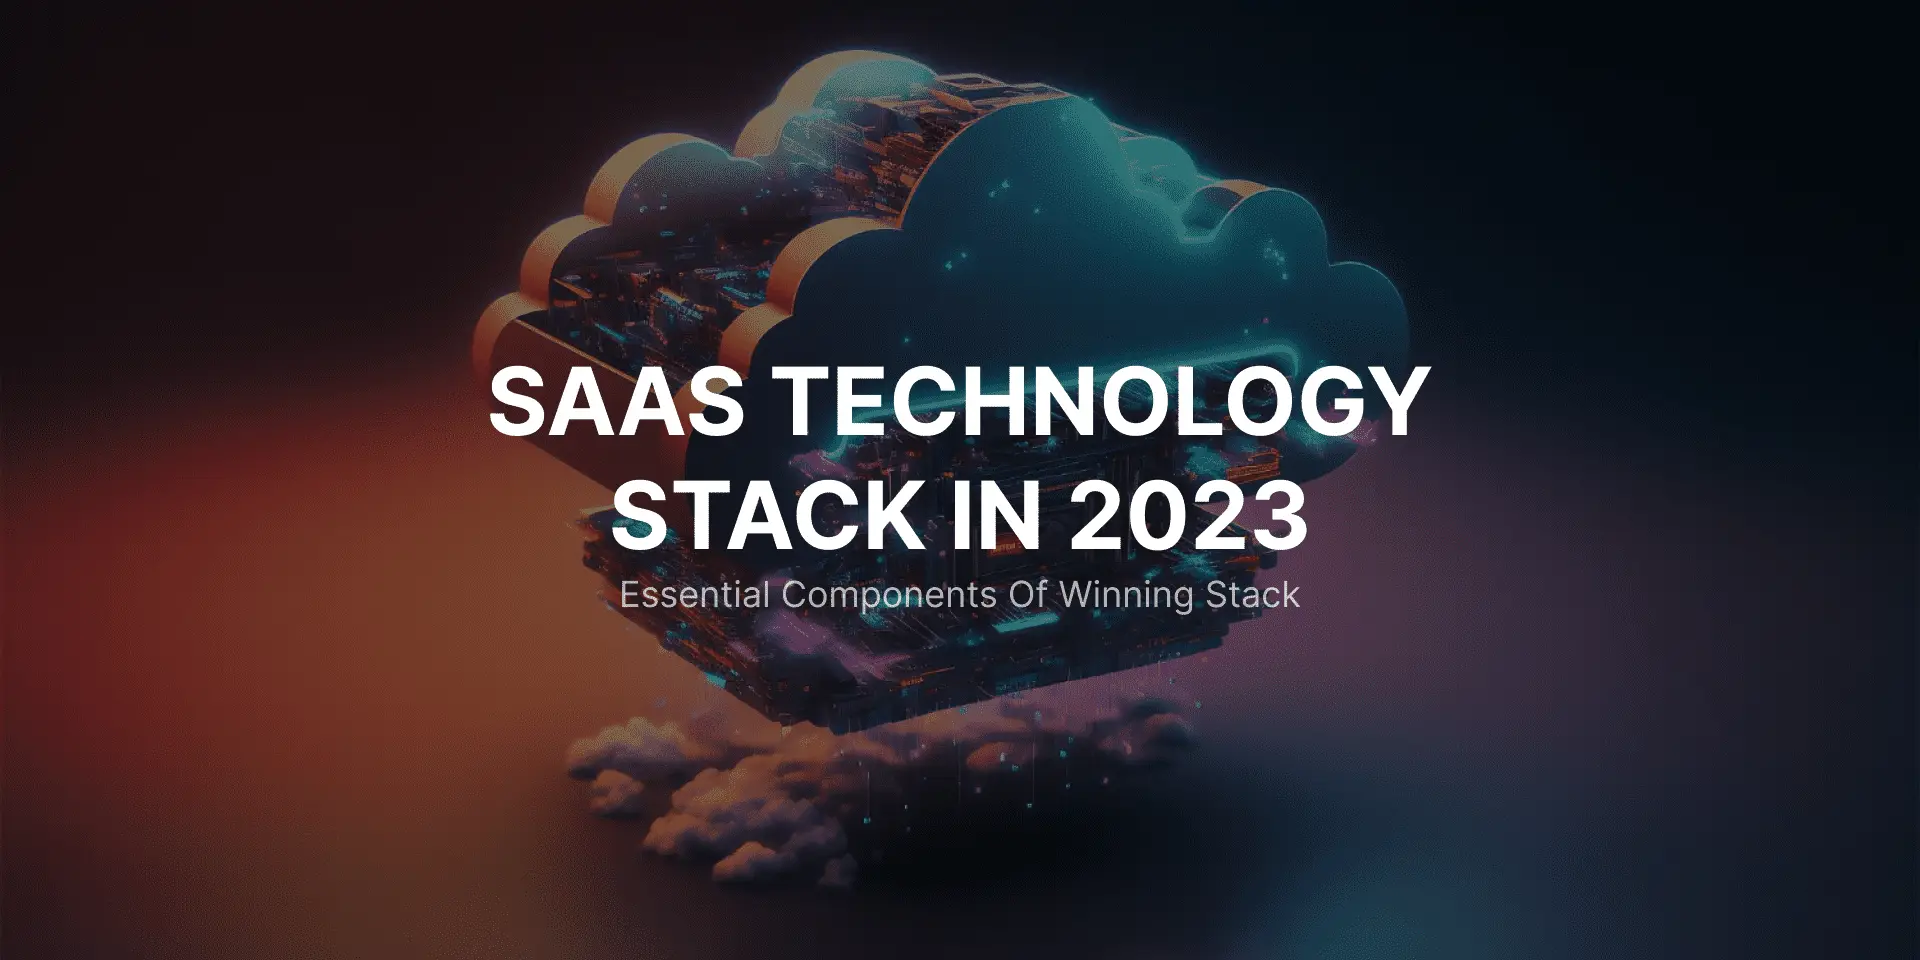 The Winning Tech Stack for a Stellar SaaS in 2023